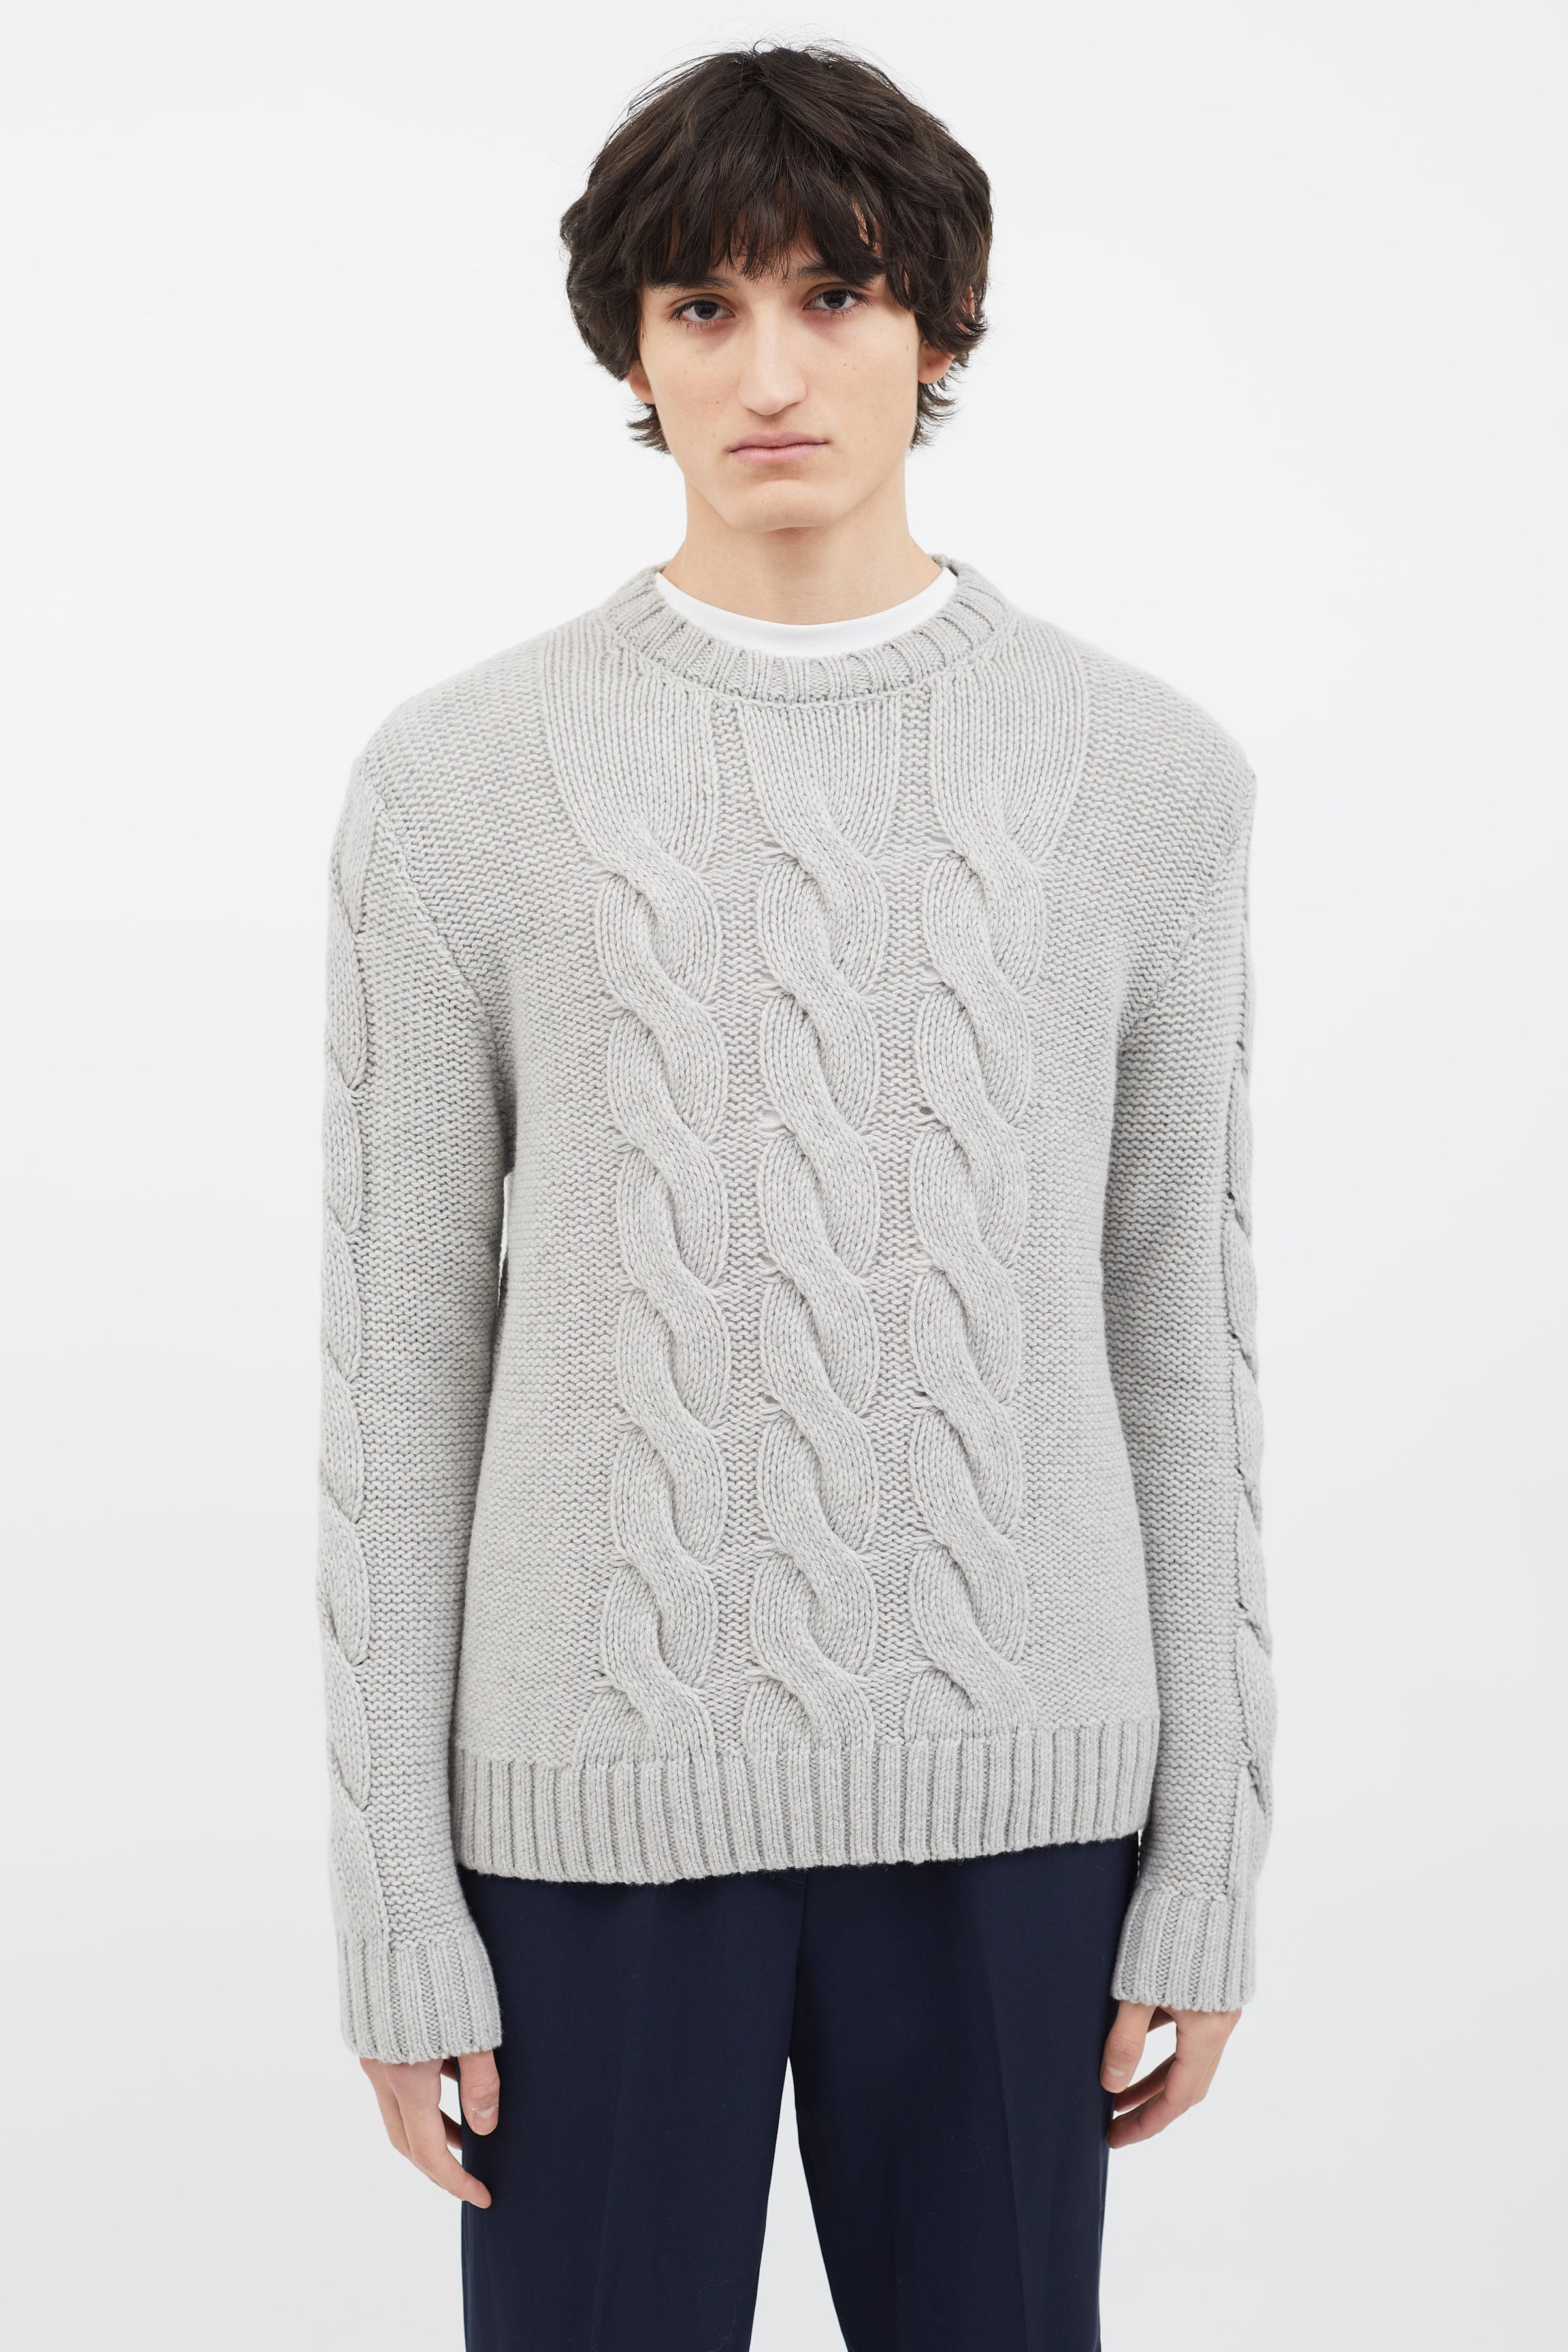 Knitwear, Knitted Jumpers & Sweaters, Barbour